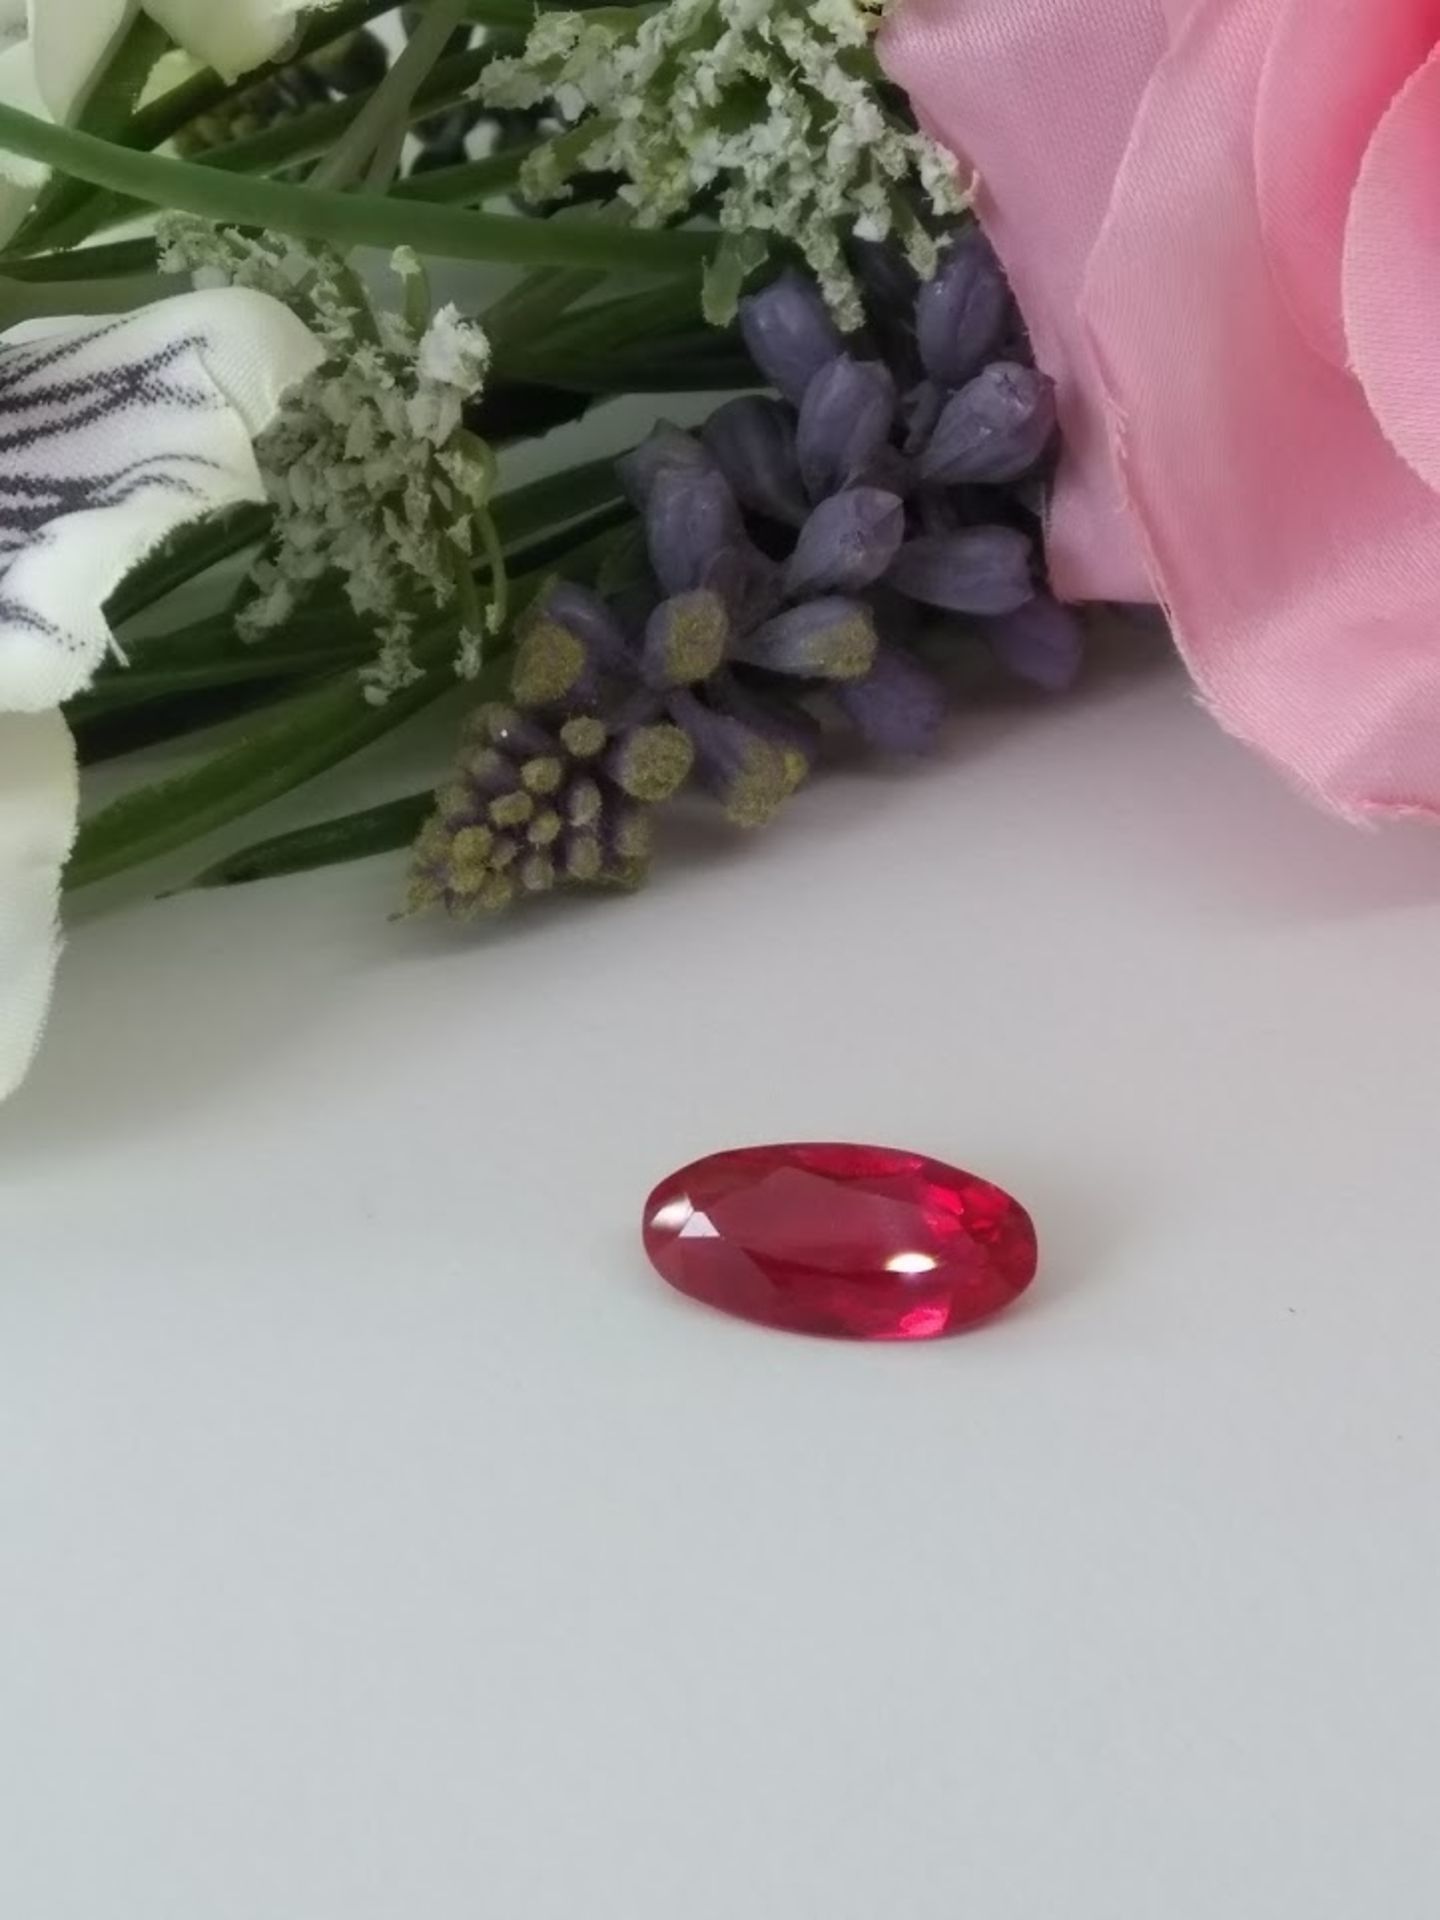 VS Clarity. A Truly Stunning AGI Certified £16,920.00 5.64 Cts Ruby Investment Gemstone - VS Clarity - Image 2 of 3